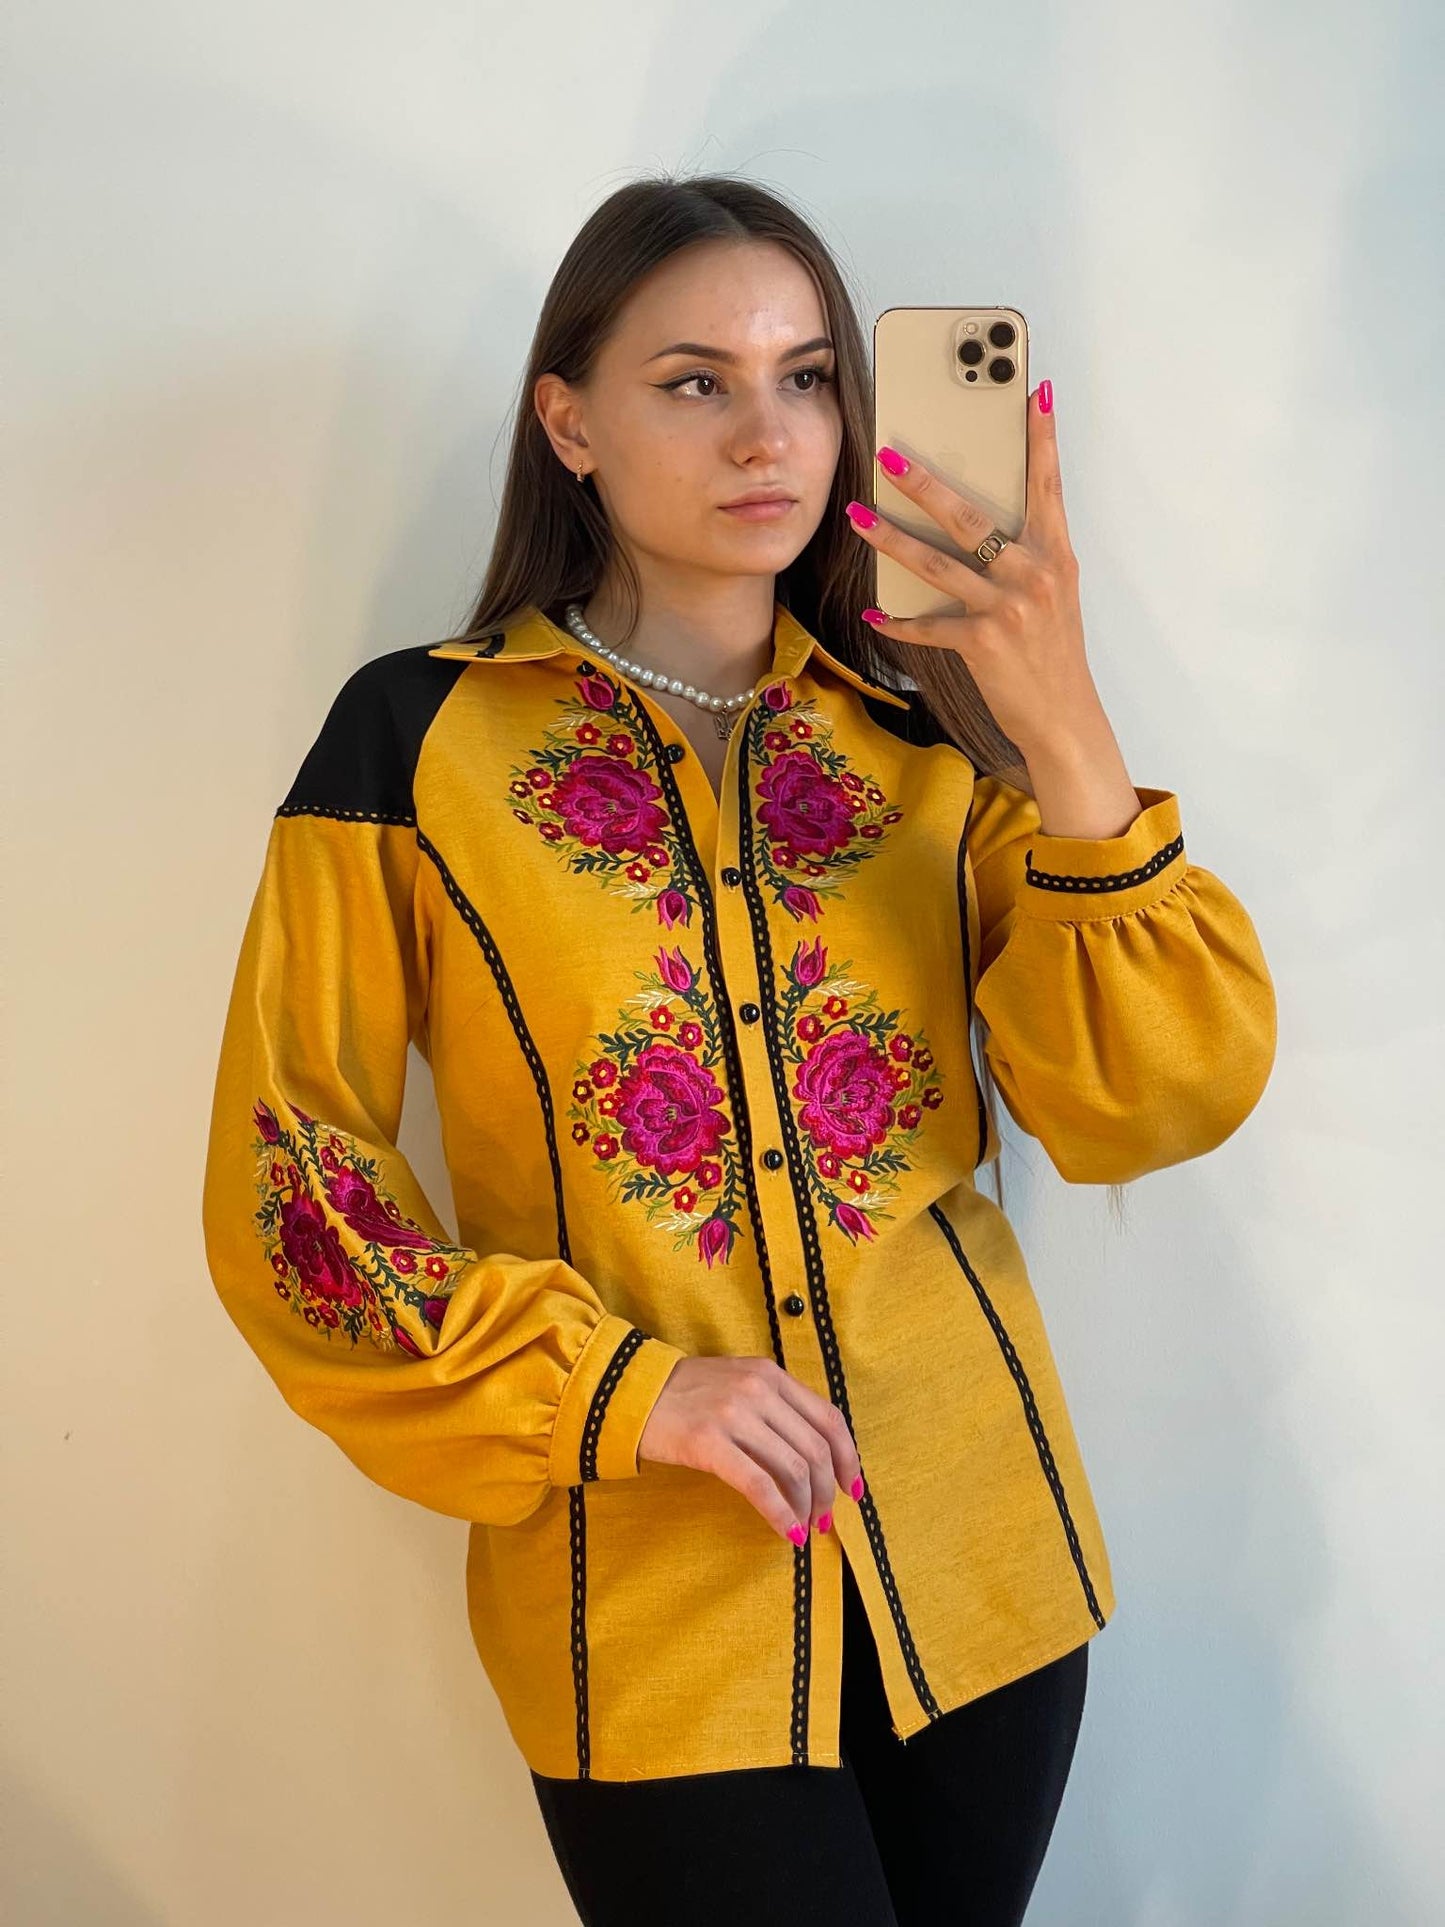 The Ochre Women's Shirt with Flowery Embroidery